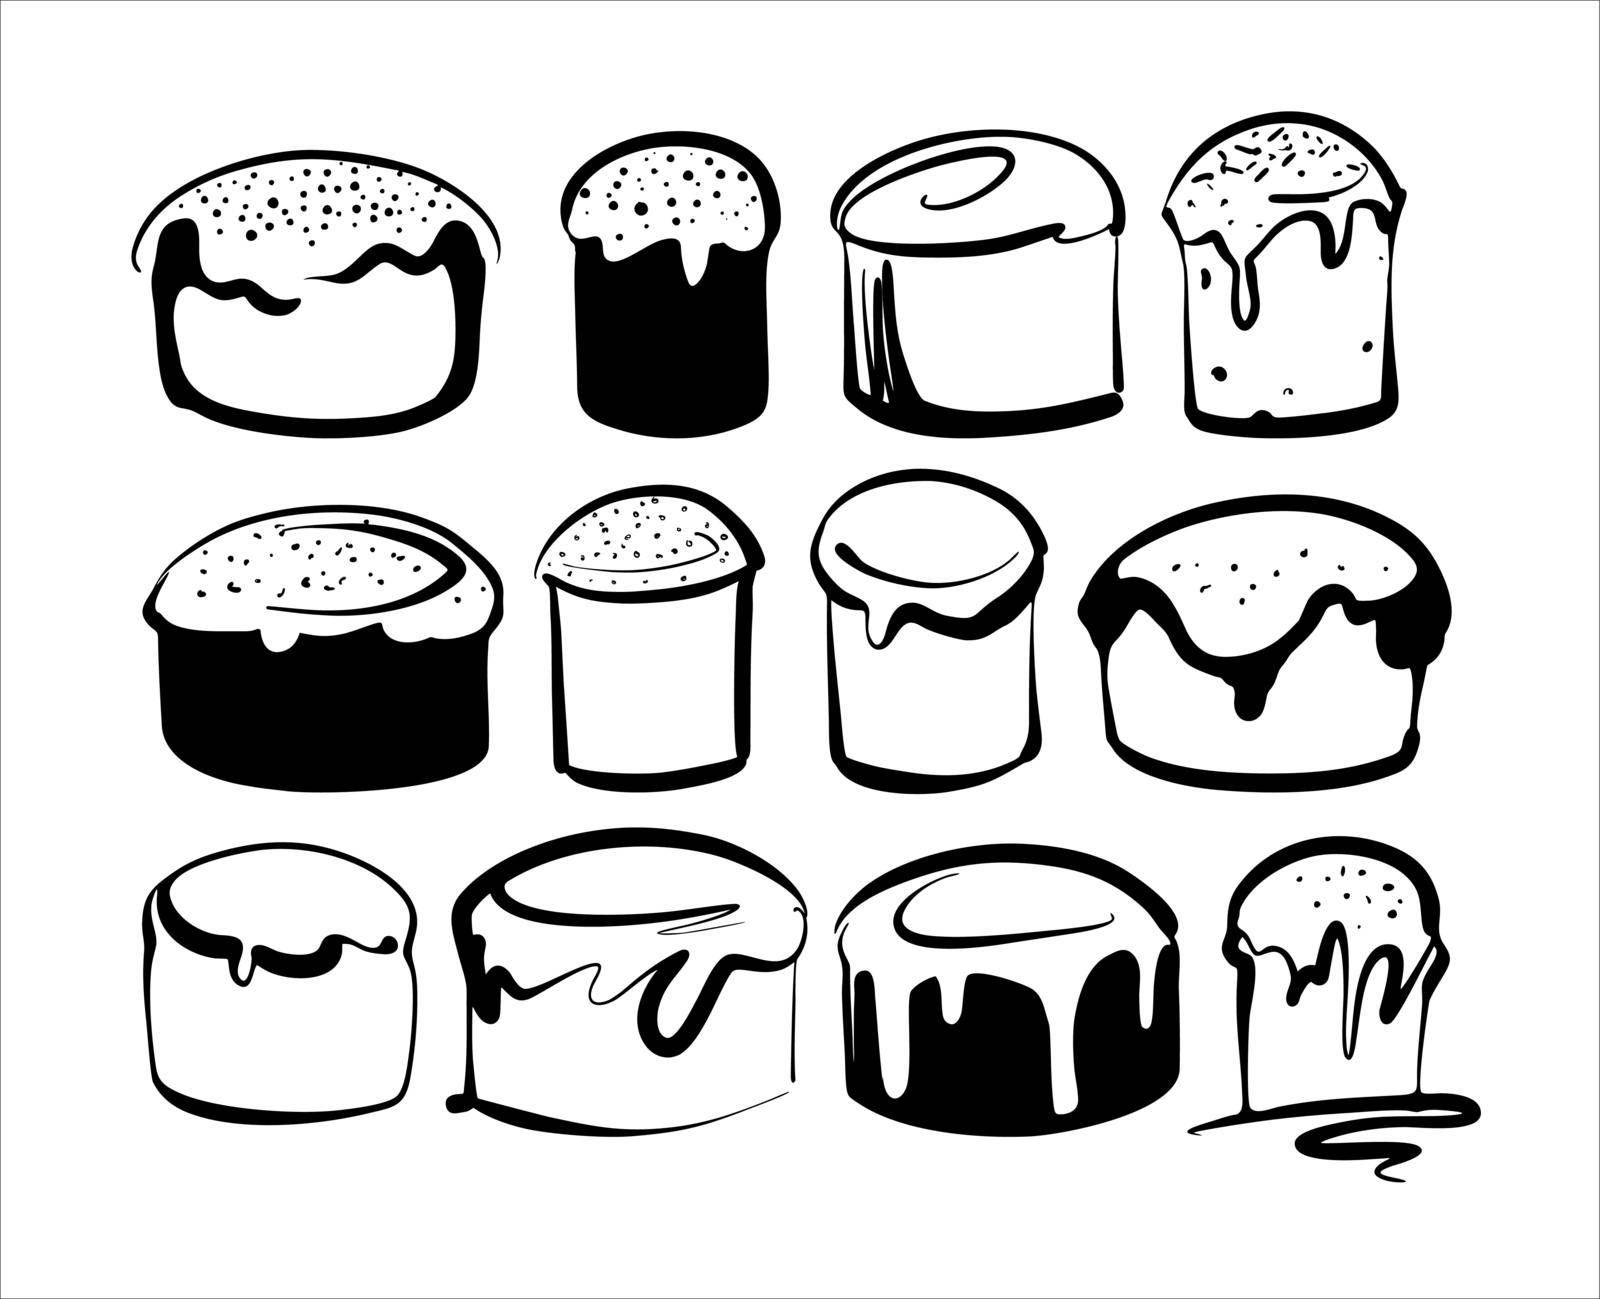 A set of Easter cakes drawn in different styles. Sketch black and white icons vector